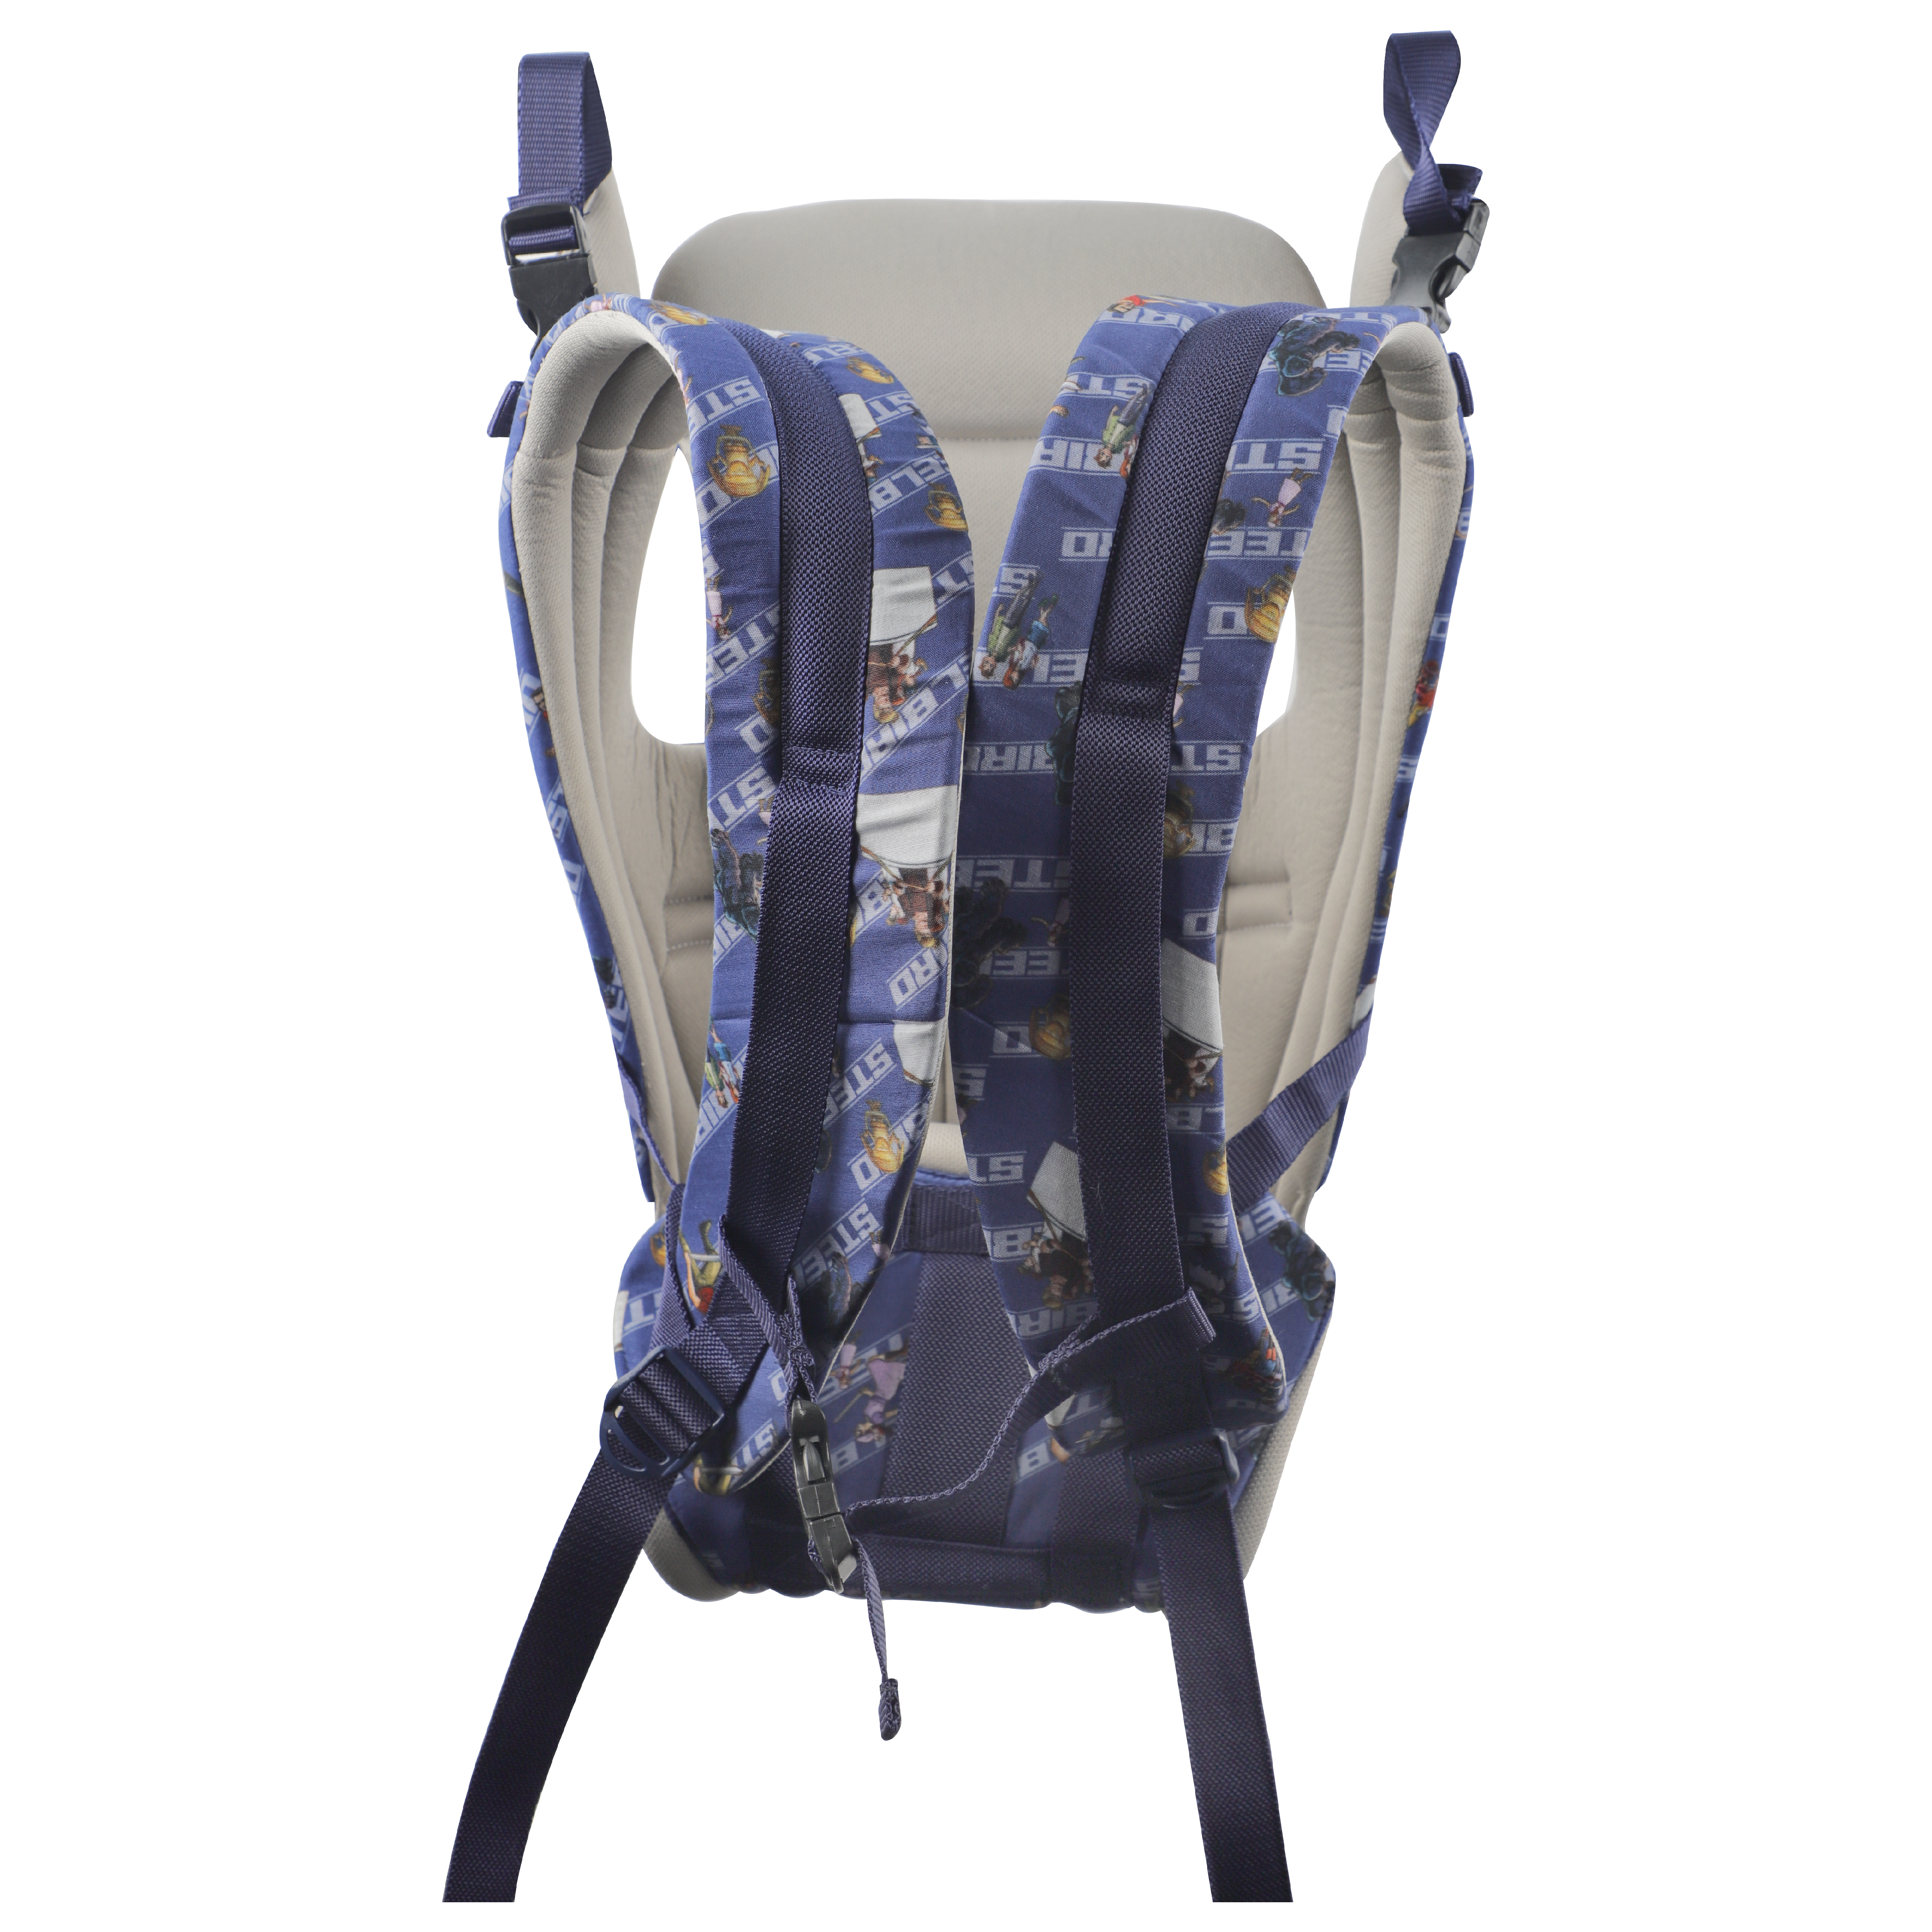 Steelbird Premium Kids 4-in-1 Adjustable Baby Carrier Cum Kangaroo Bag With Lumbar Support-Lightweight And Breathable-Back-Front Carrier For Baby With Safety Belt-Max Weight Up To 15 Kg (PRINTED BLUE)